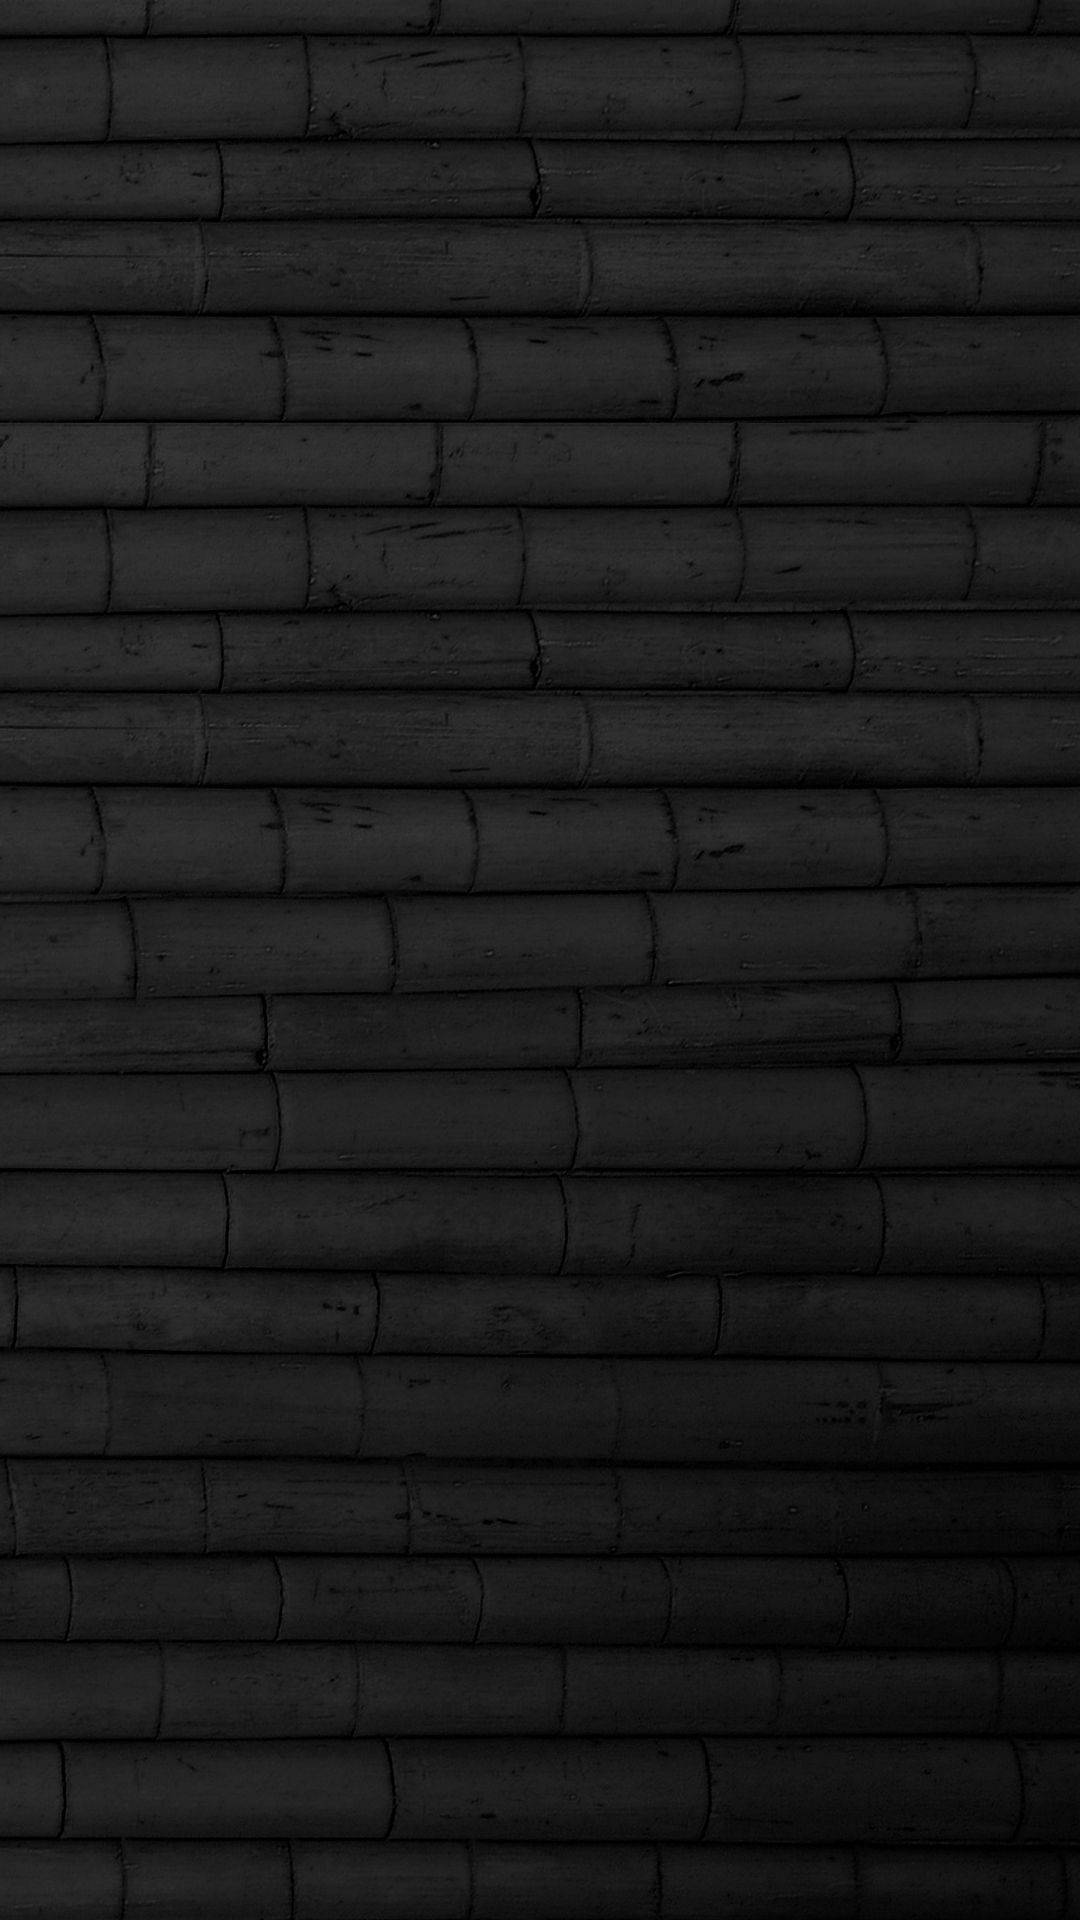 Bamboo Solid Black Iphone Background